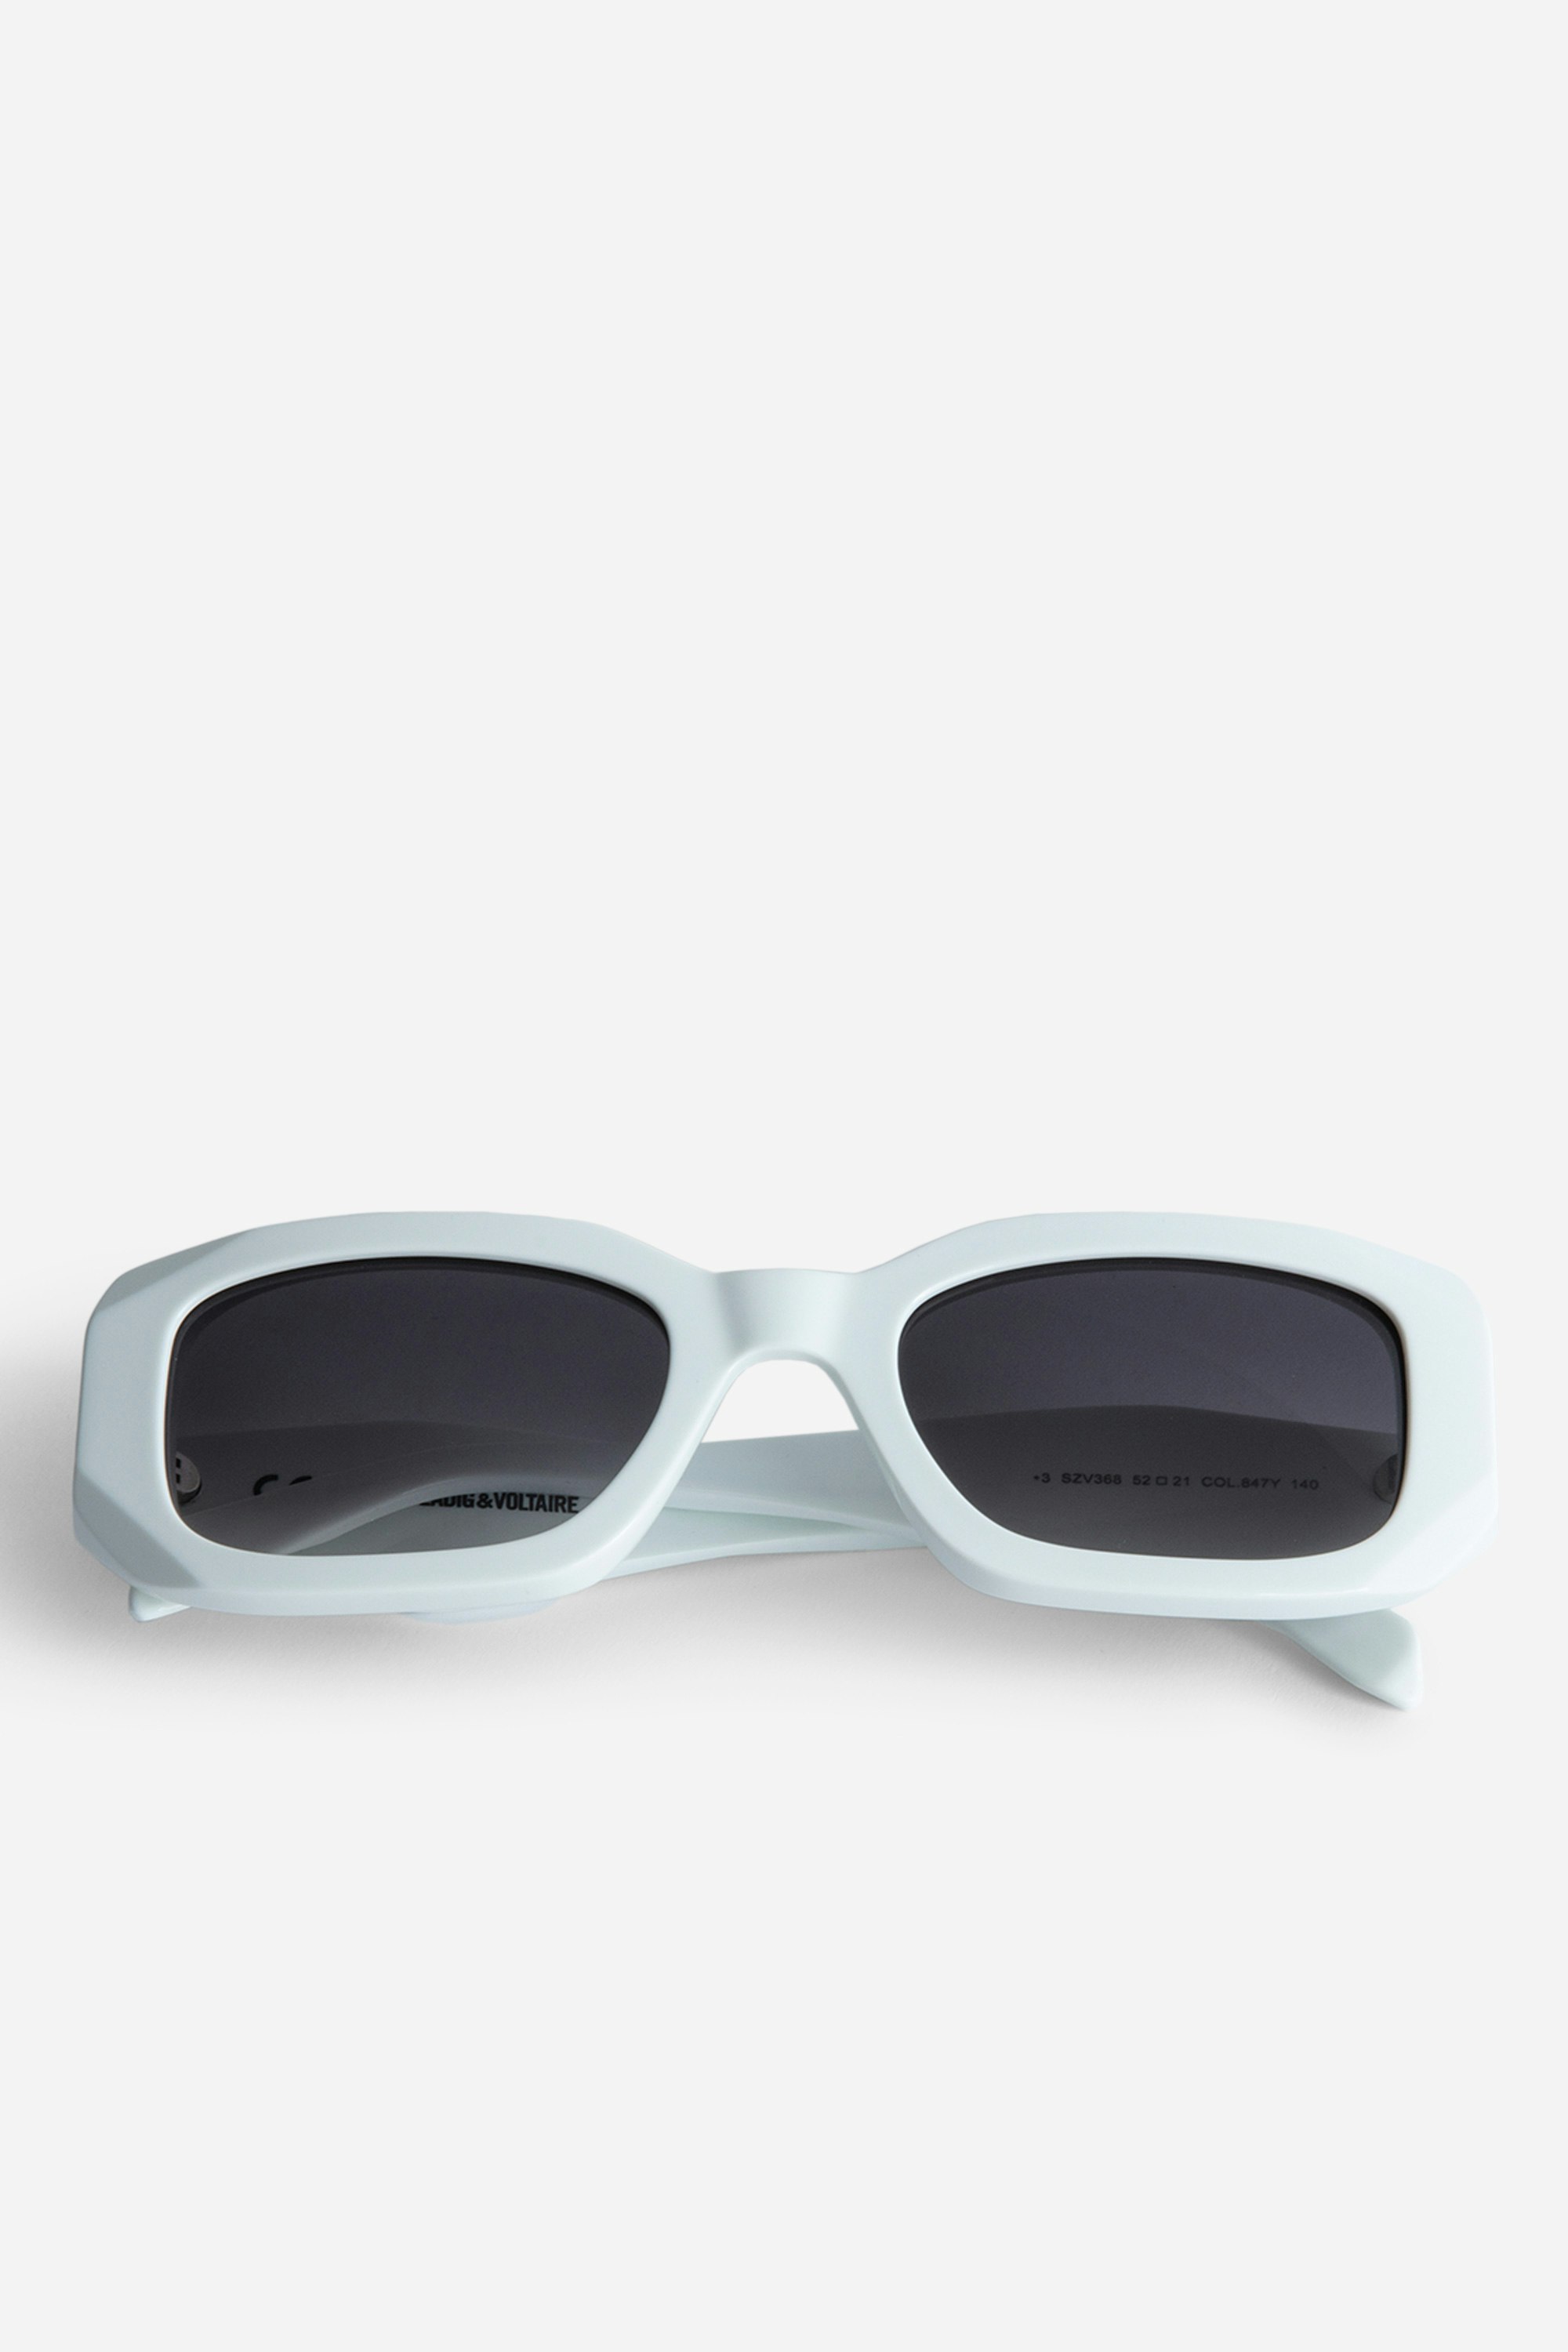 ZV23H3 Sunglasses - Unisex white rectangular sunglasses with wings on the unstructured temples.